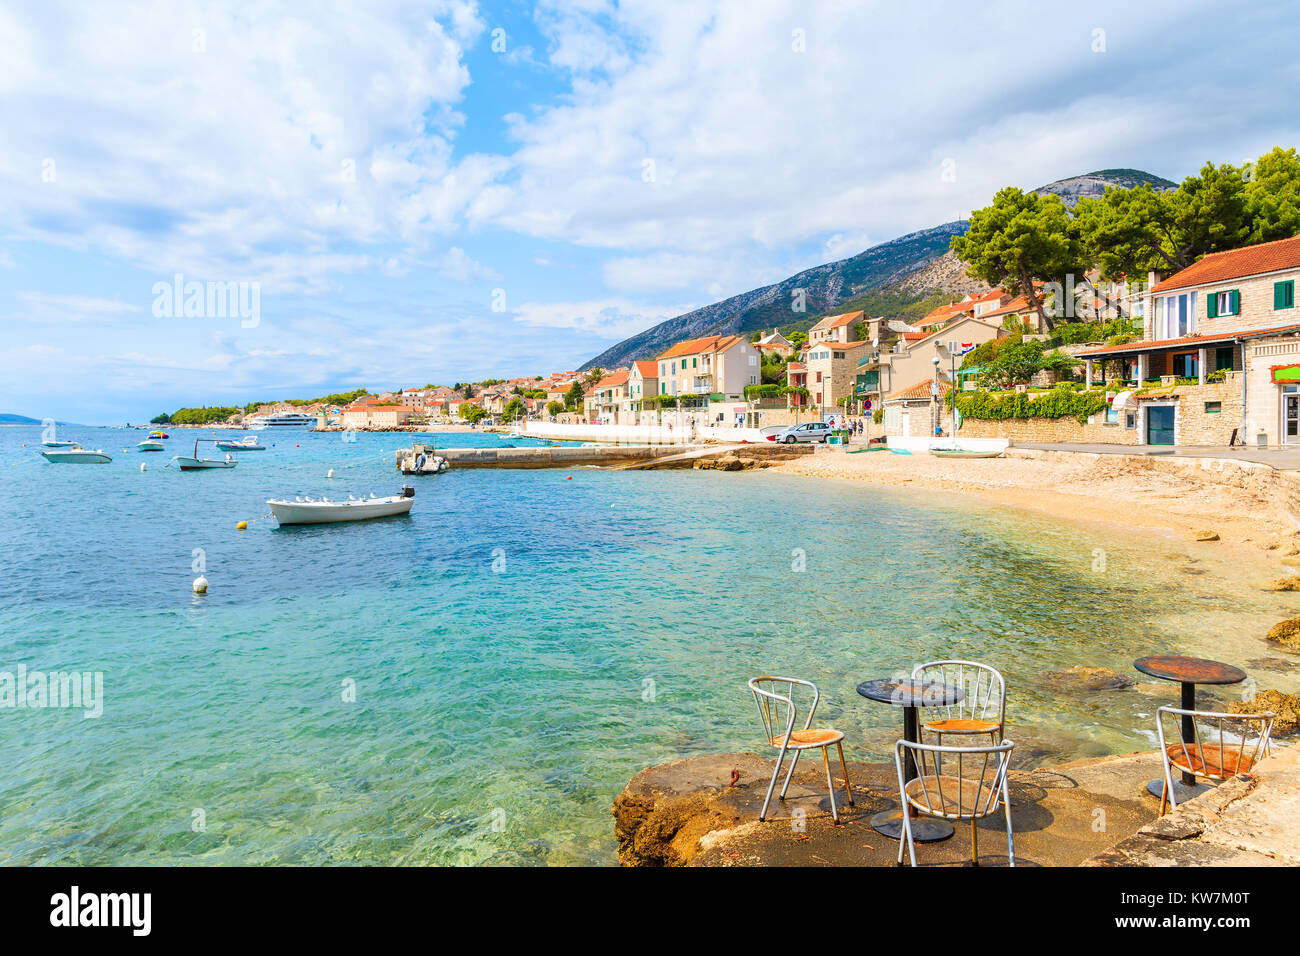 Metal cafe chairs on beach in Bol port with typical town architecture, Brac island, Croatia Stock Photo